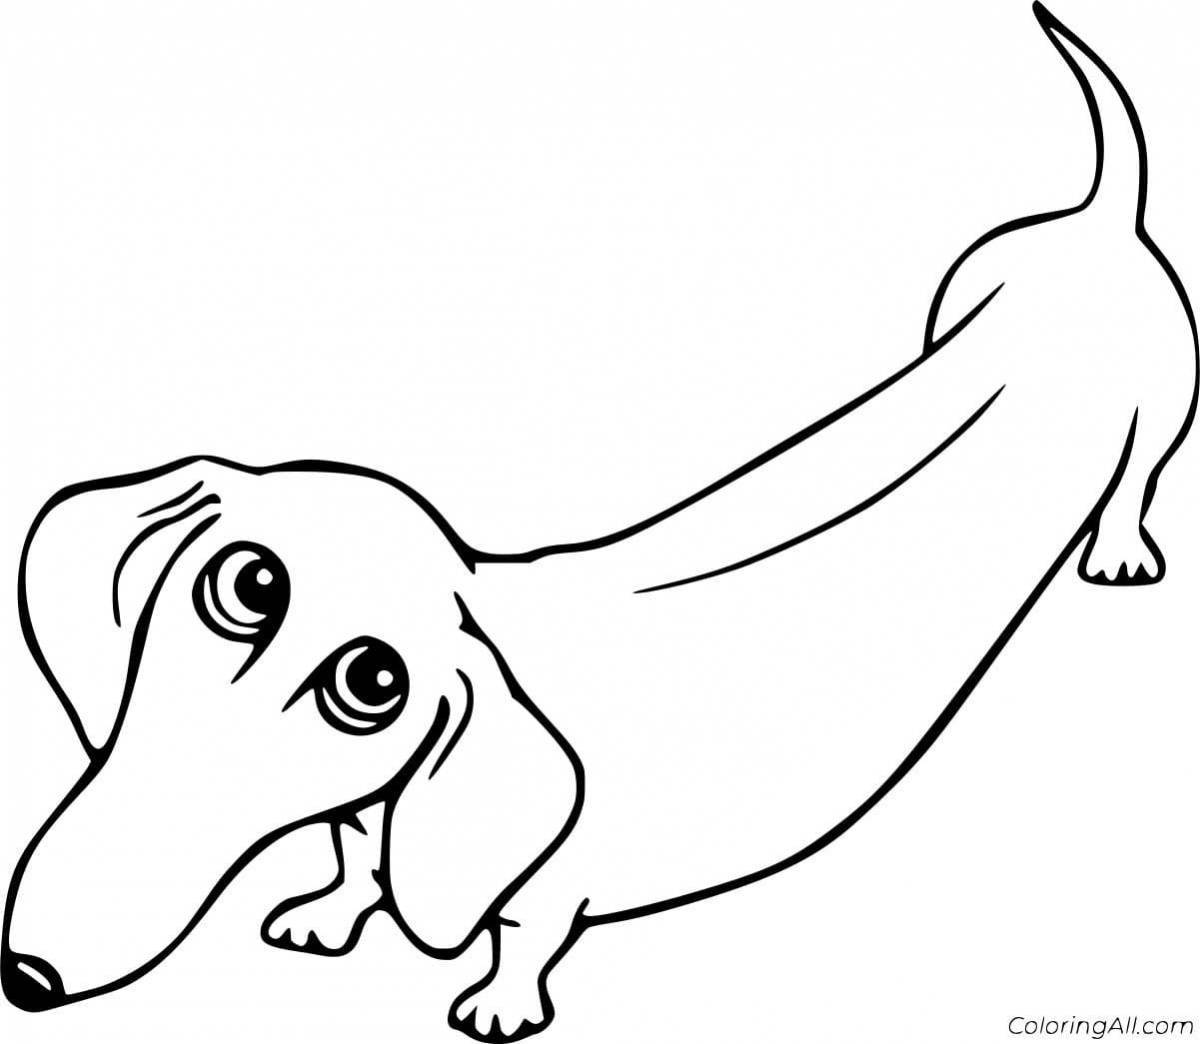 Attractive dachshund coloring page